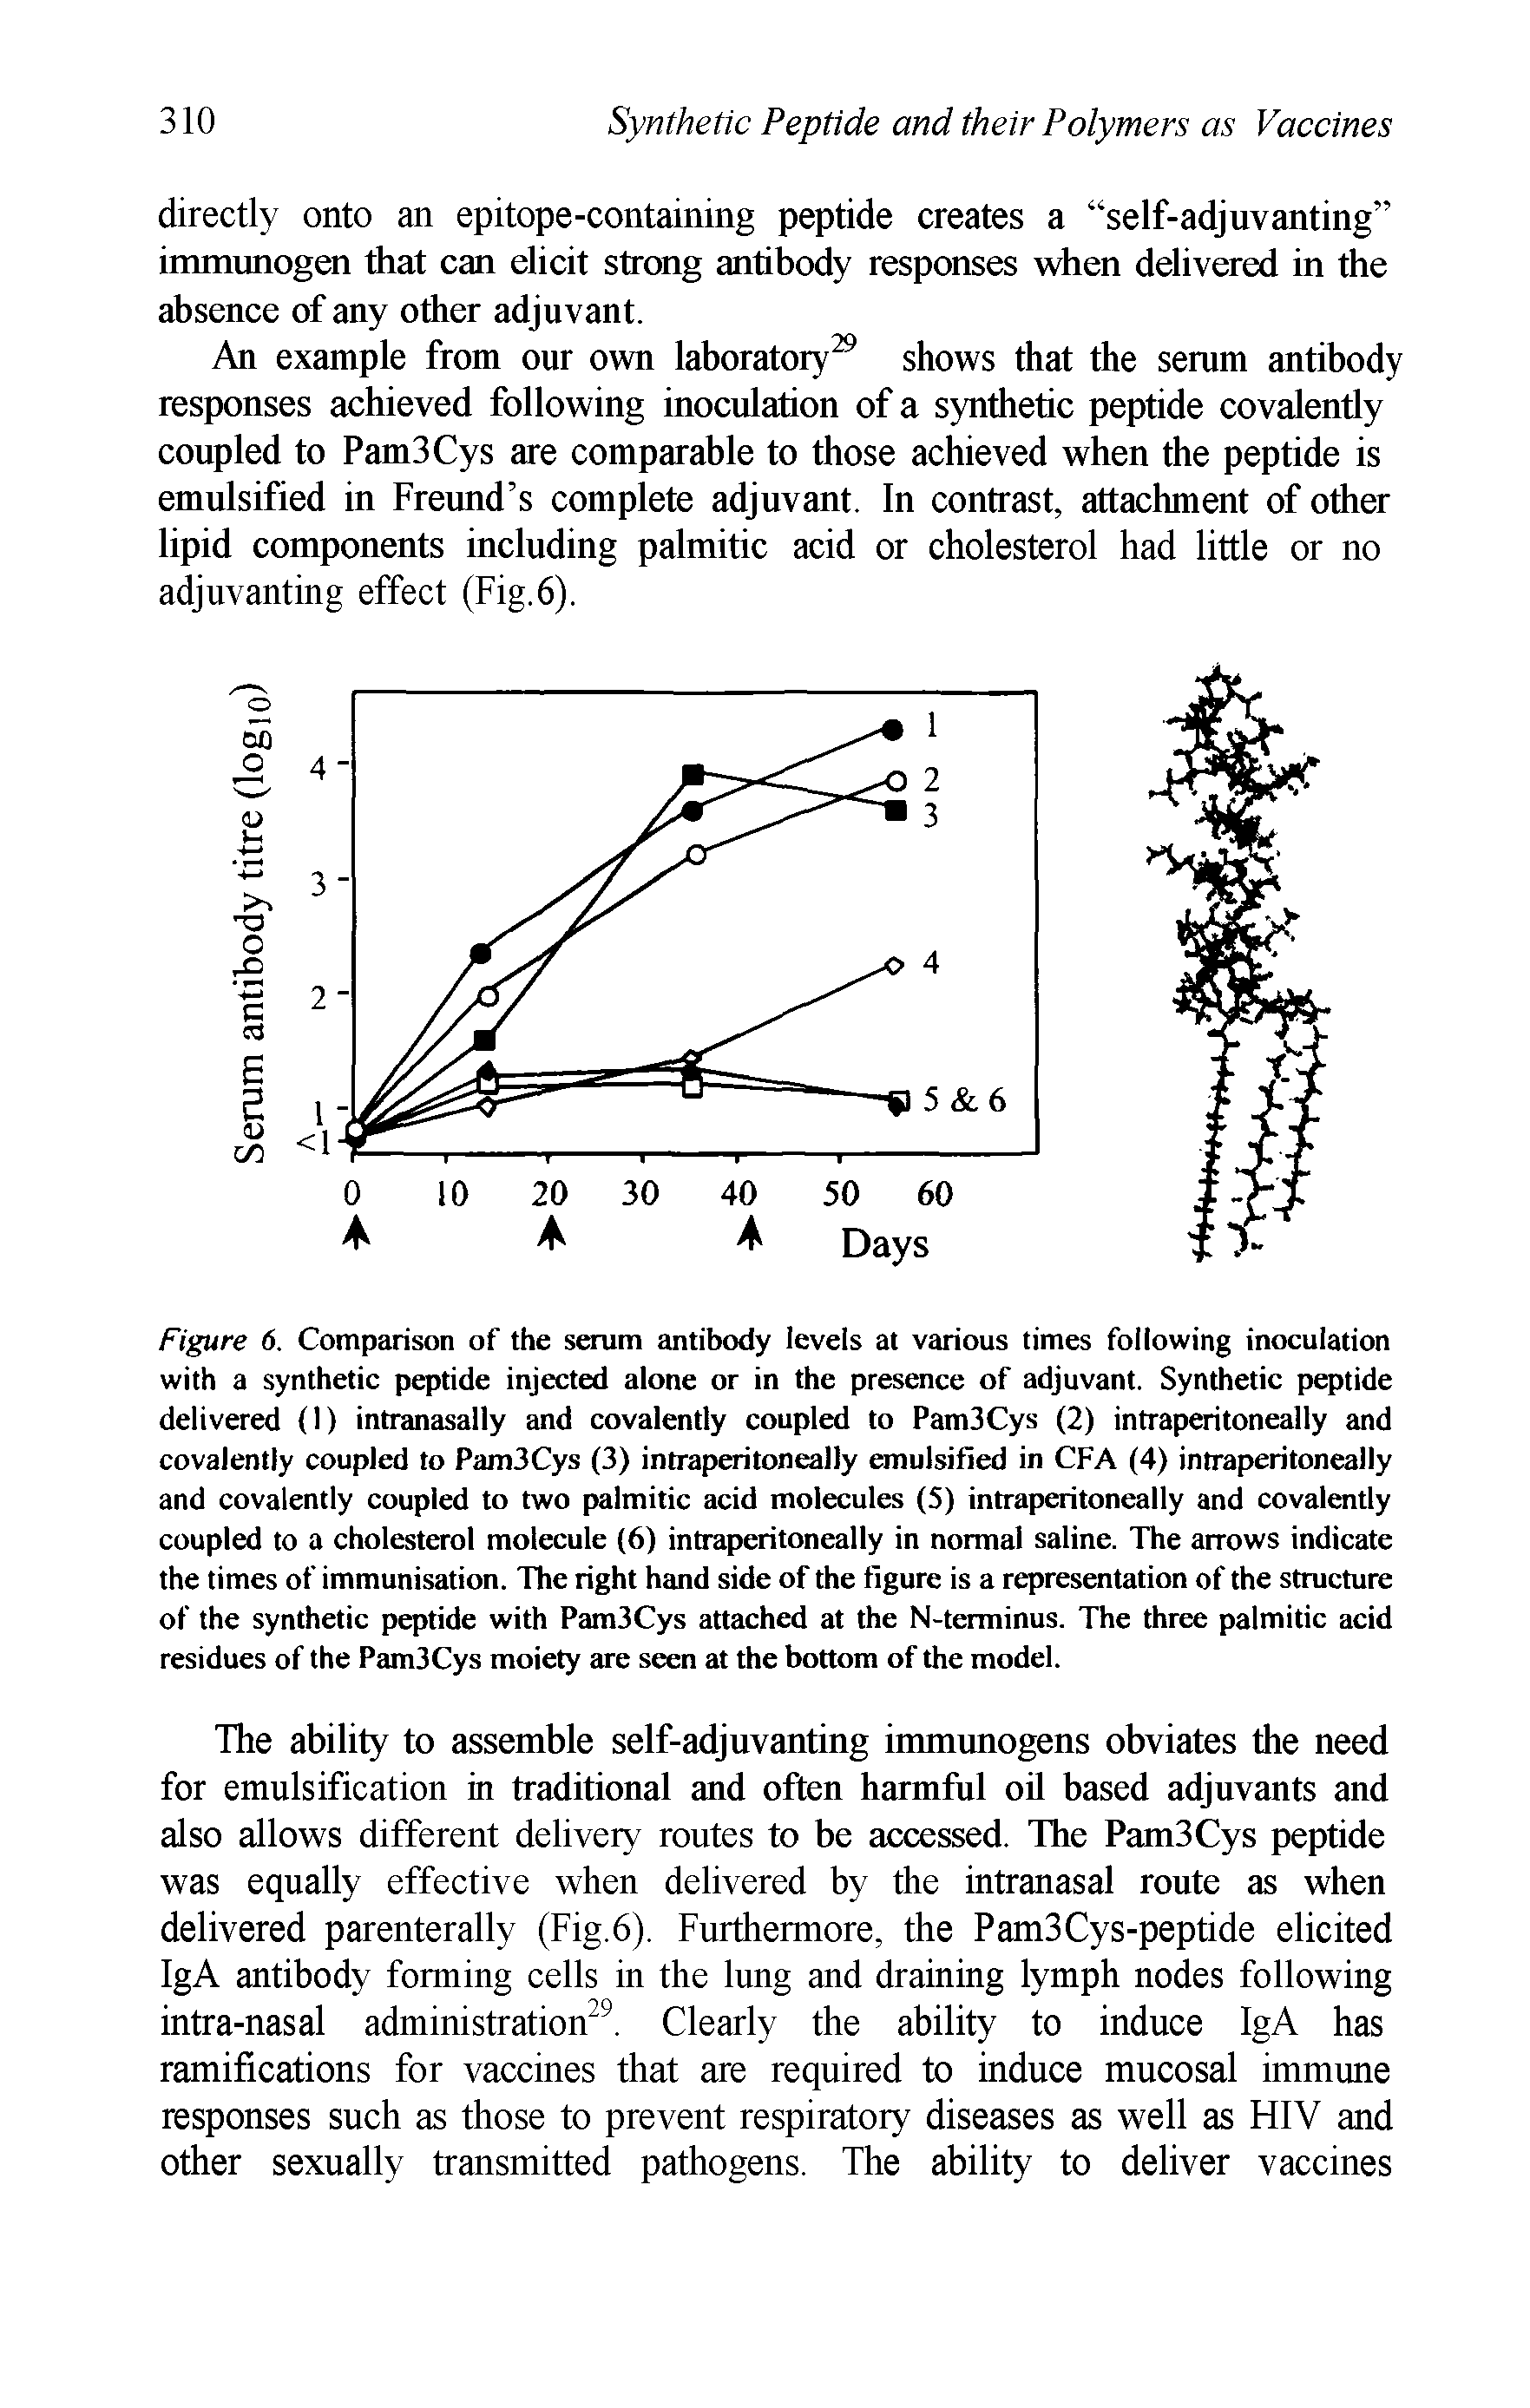 Figure 6. Comparison of the serum antibody levels at various times following inoculation with a synthetic peptide injected alone or in the presence of adjuvant. Synthetic peptide delivered (1) intranasally and covalently coupled to Pam3Cys (2) intraperitoneally and covalently coupled to Pam3Cys (3) intraperitoneally emulsified in CFA (4) intraperitoneally and covalently coupled to two palmitic acid molecules (S) intraperitoneally and covalently coupled to a cholesterol molecule (6) intraperitoneally in normal saline. The arrows indicate the times of immunisation. The right hand side of the figure is a representation of the structure of the synthetic peptide with Pam3Cys attached at the N-terminus. The three palmitic acid residues of the Pam3Cys moiety are seen at the bottom of the model.